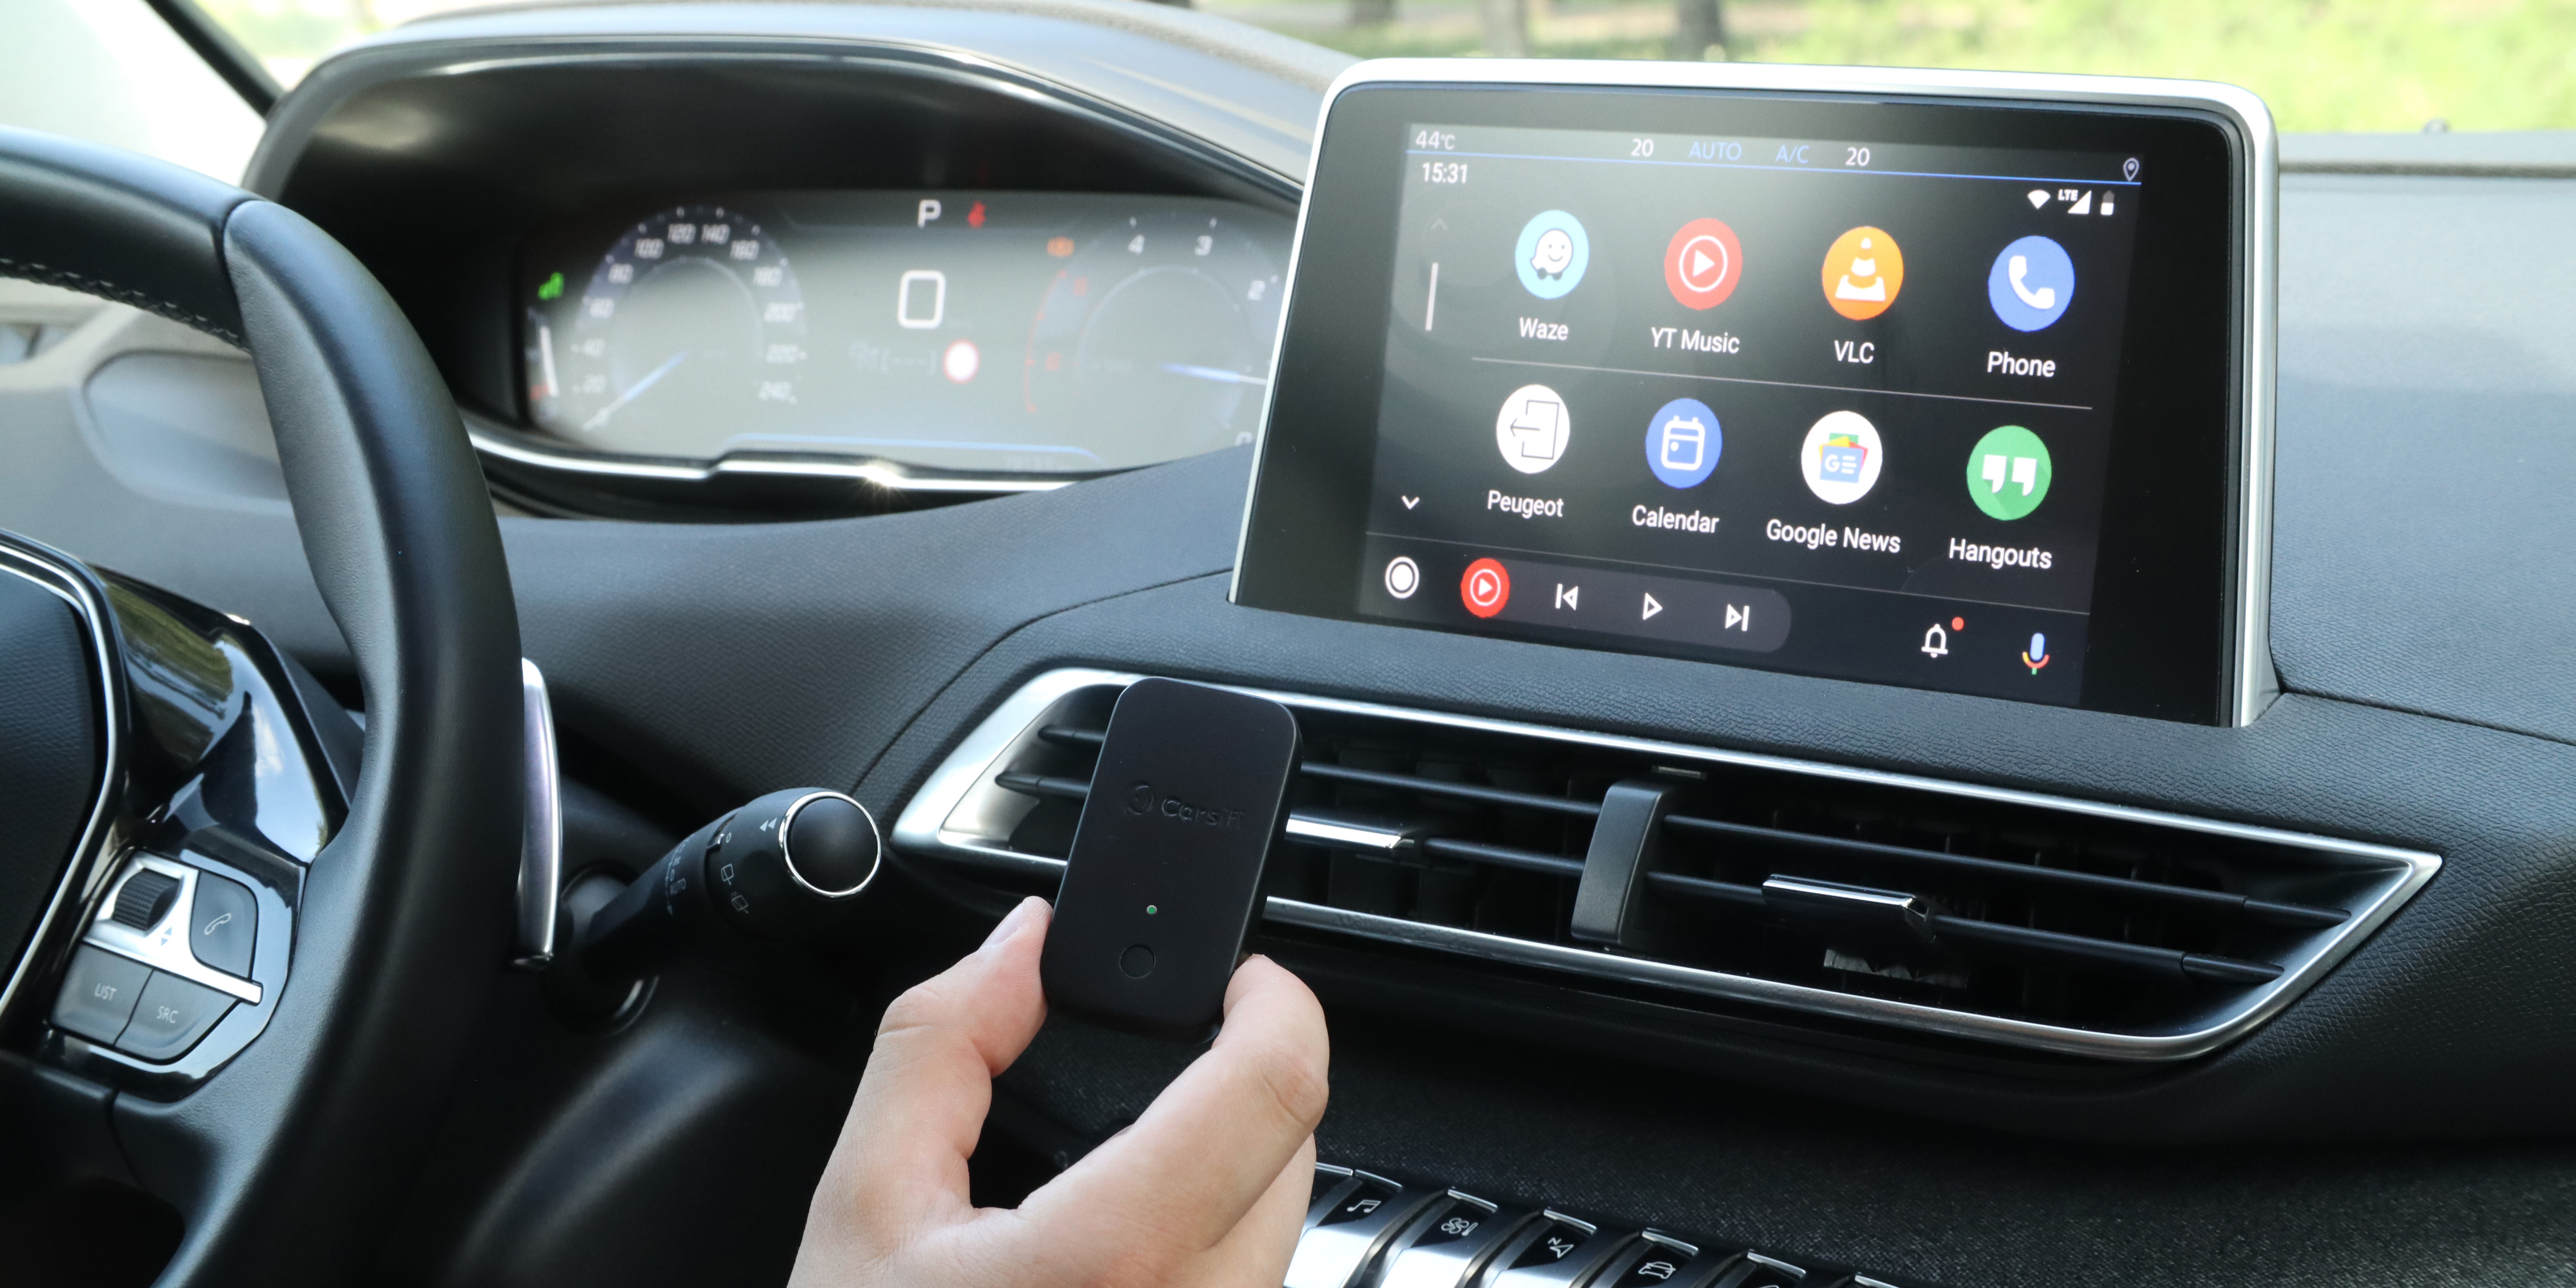 AAWireless Review: Easily added wireless Android Auto - 9to5Google